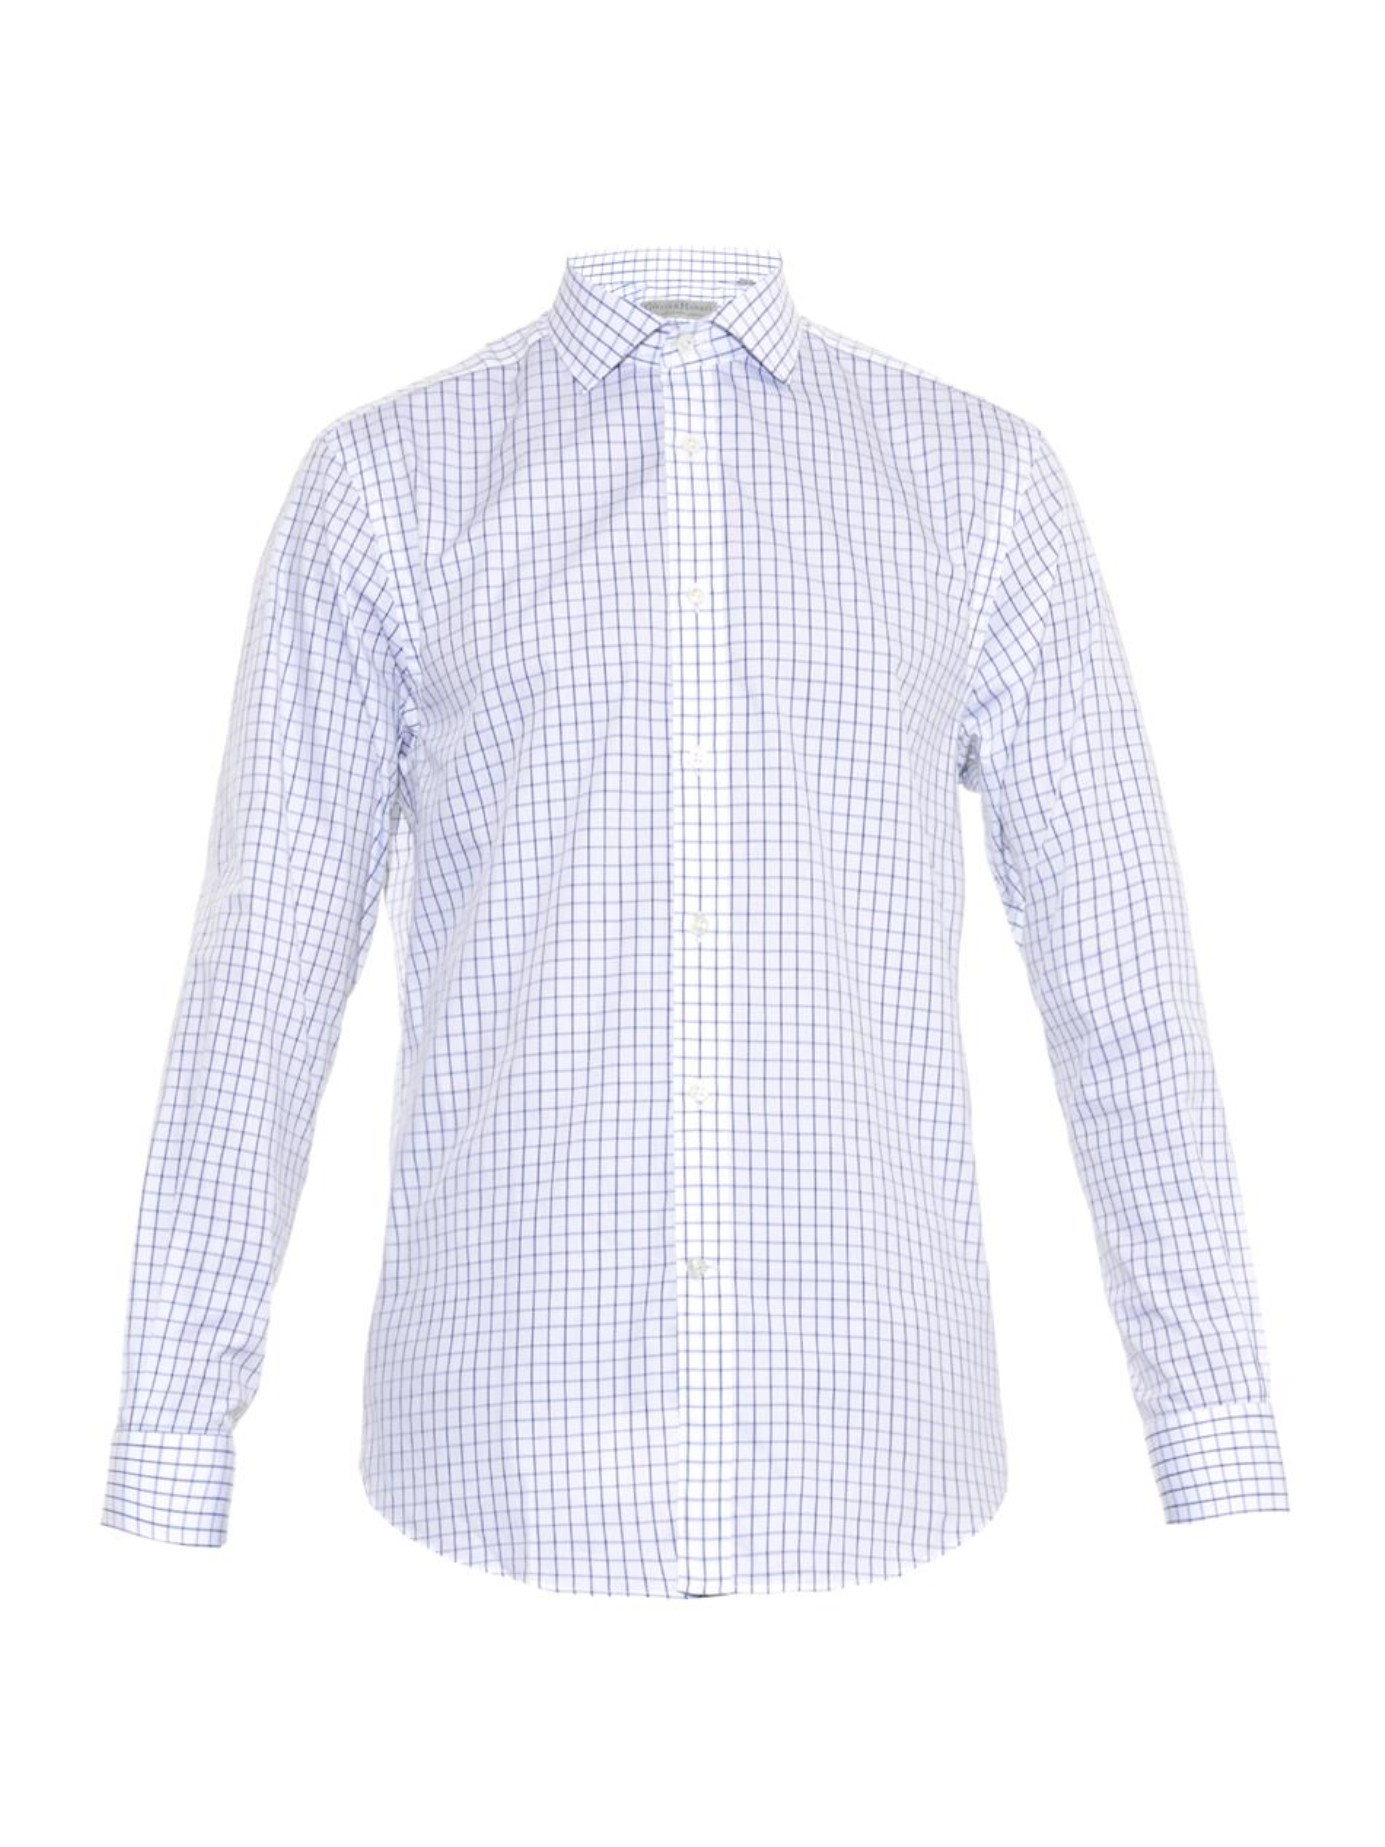 Gieves & Hawkes Checked Cotton Shirt in Blue for Men (NAVY) | Lyst